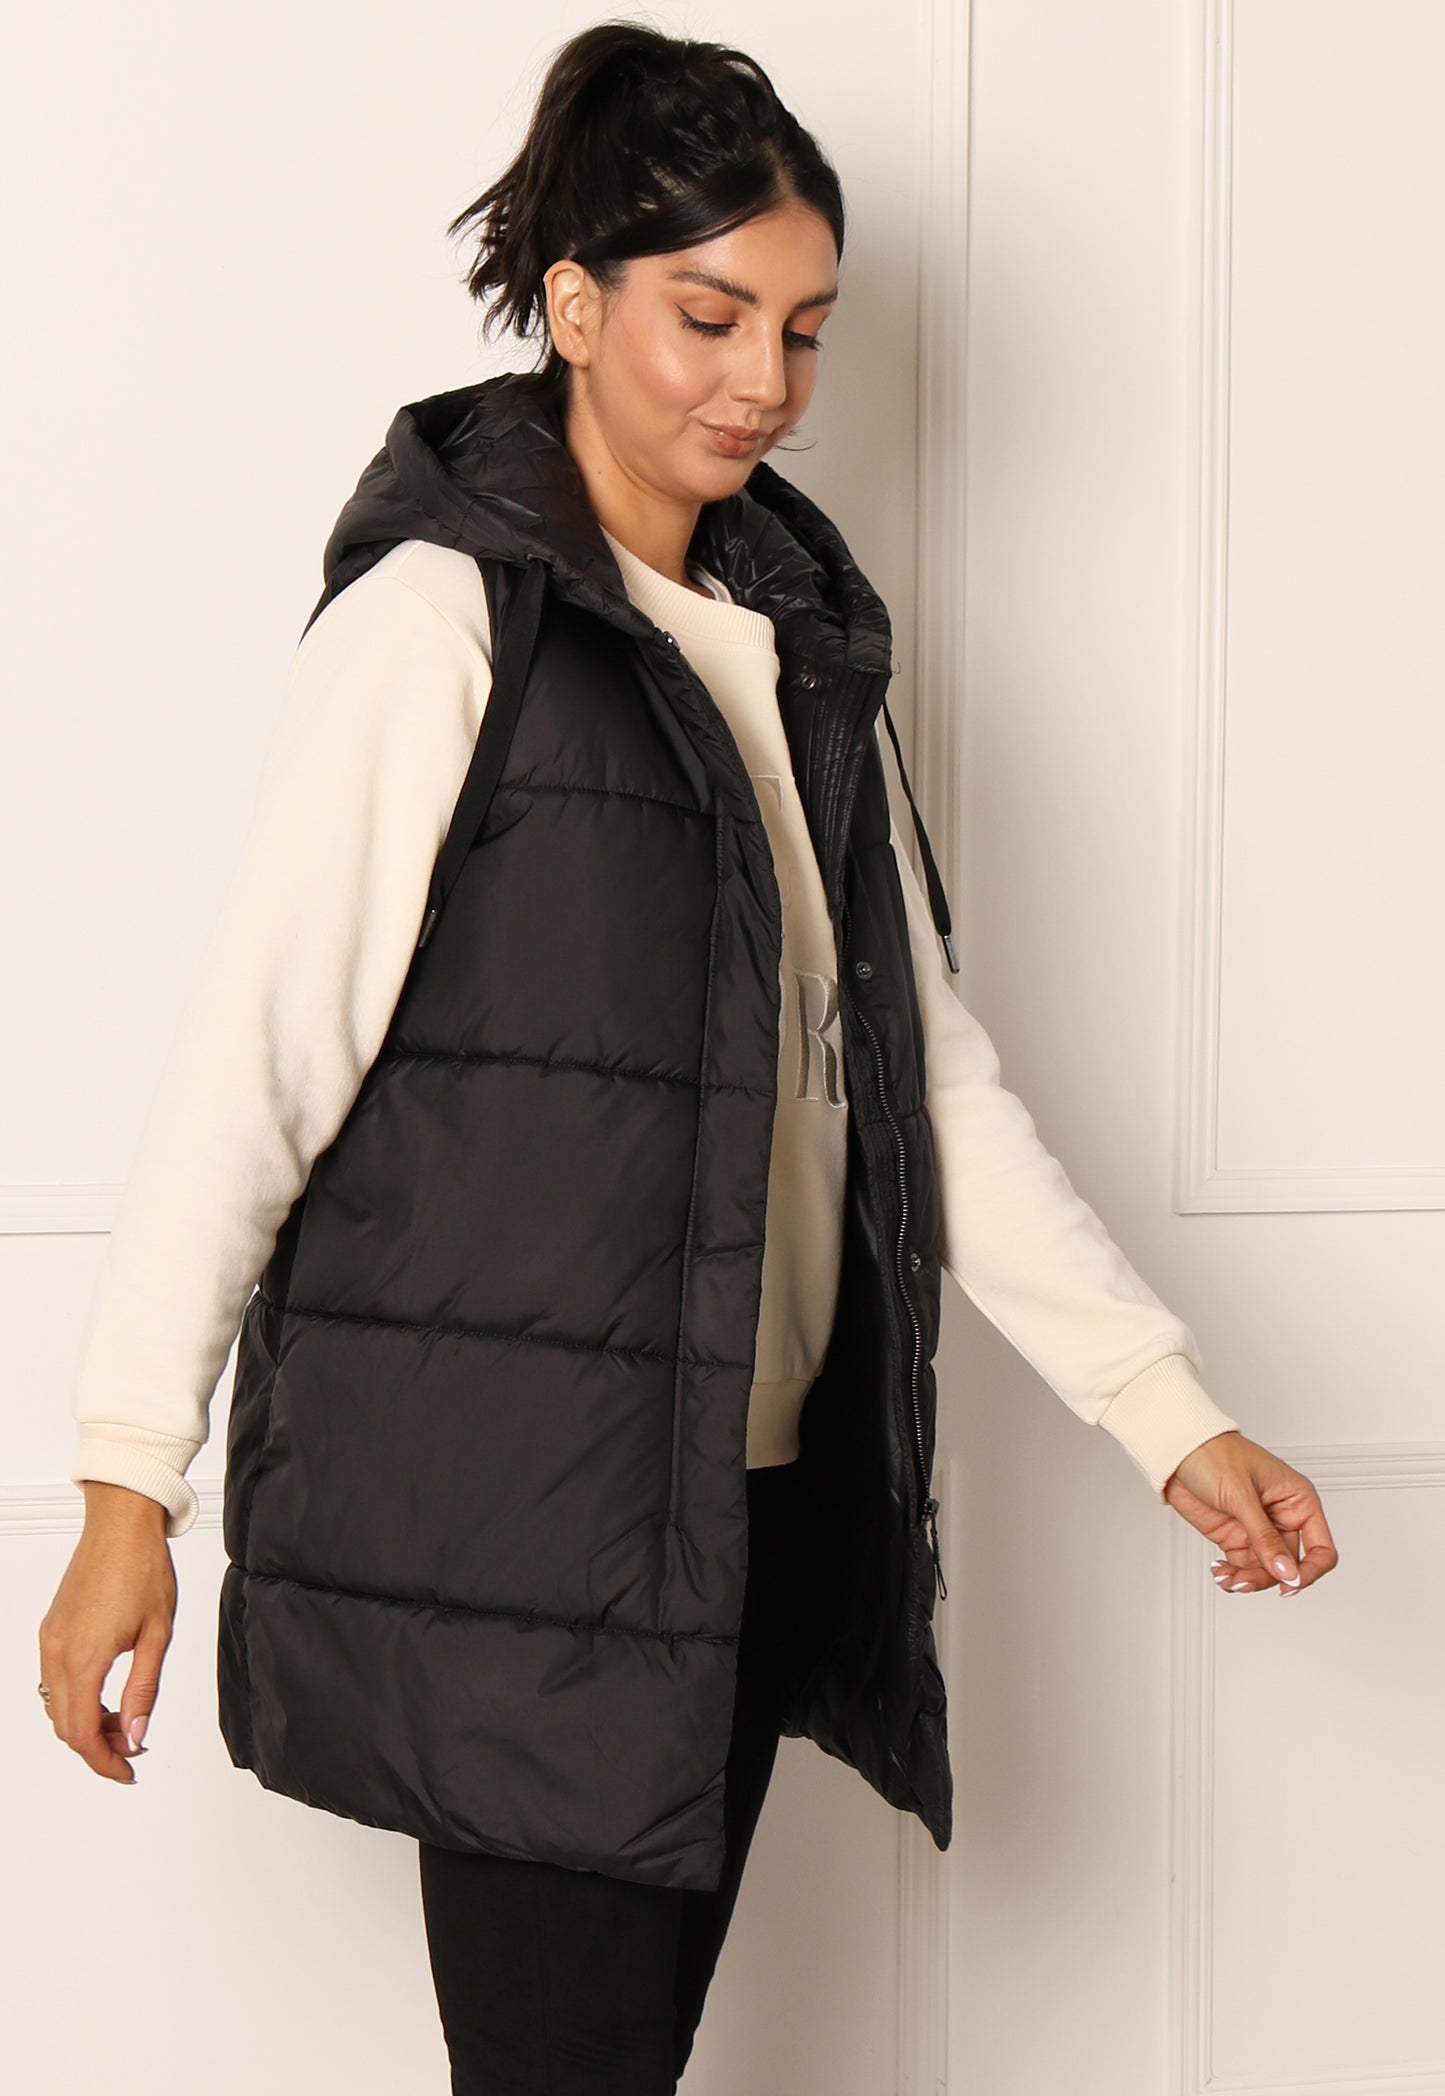 ONLY Asta Longline Sleeveless Puffer Gilet with Hood in Black - vietnamzoom